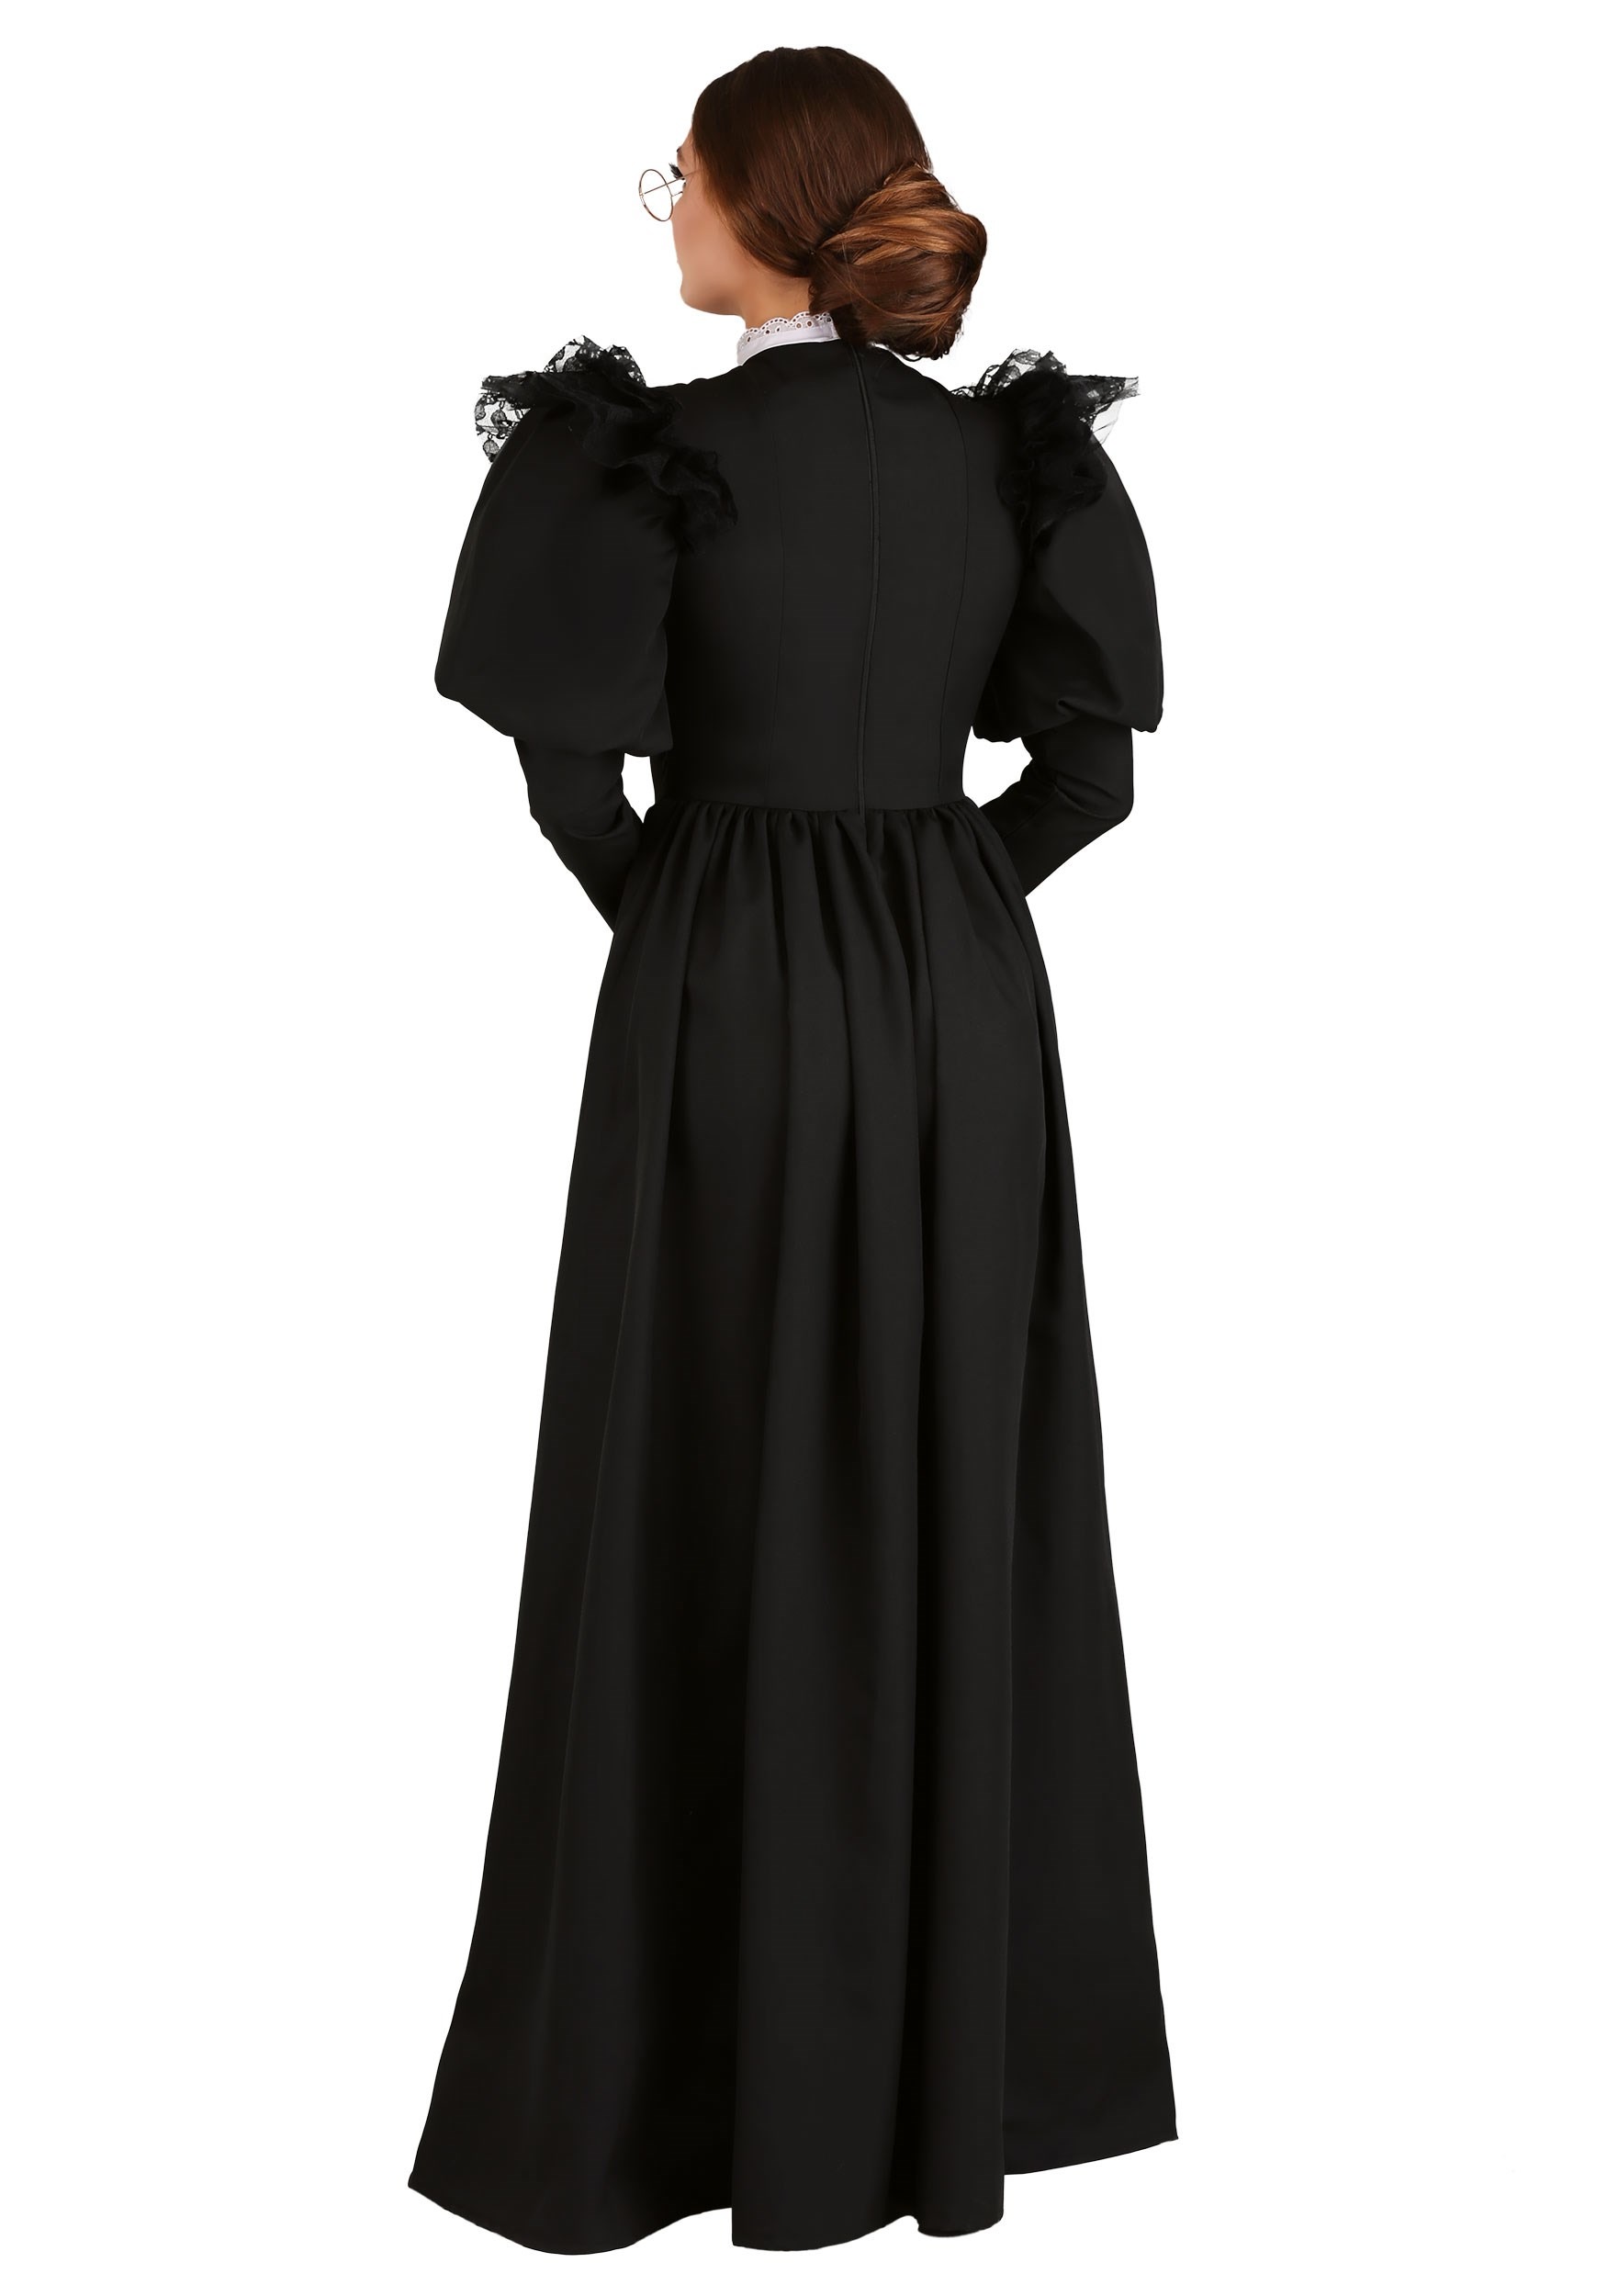 Susan B. Anthony Costume For Women